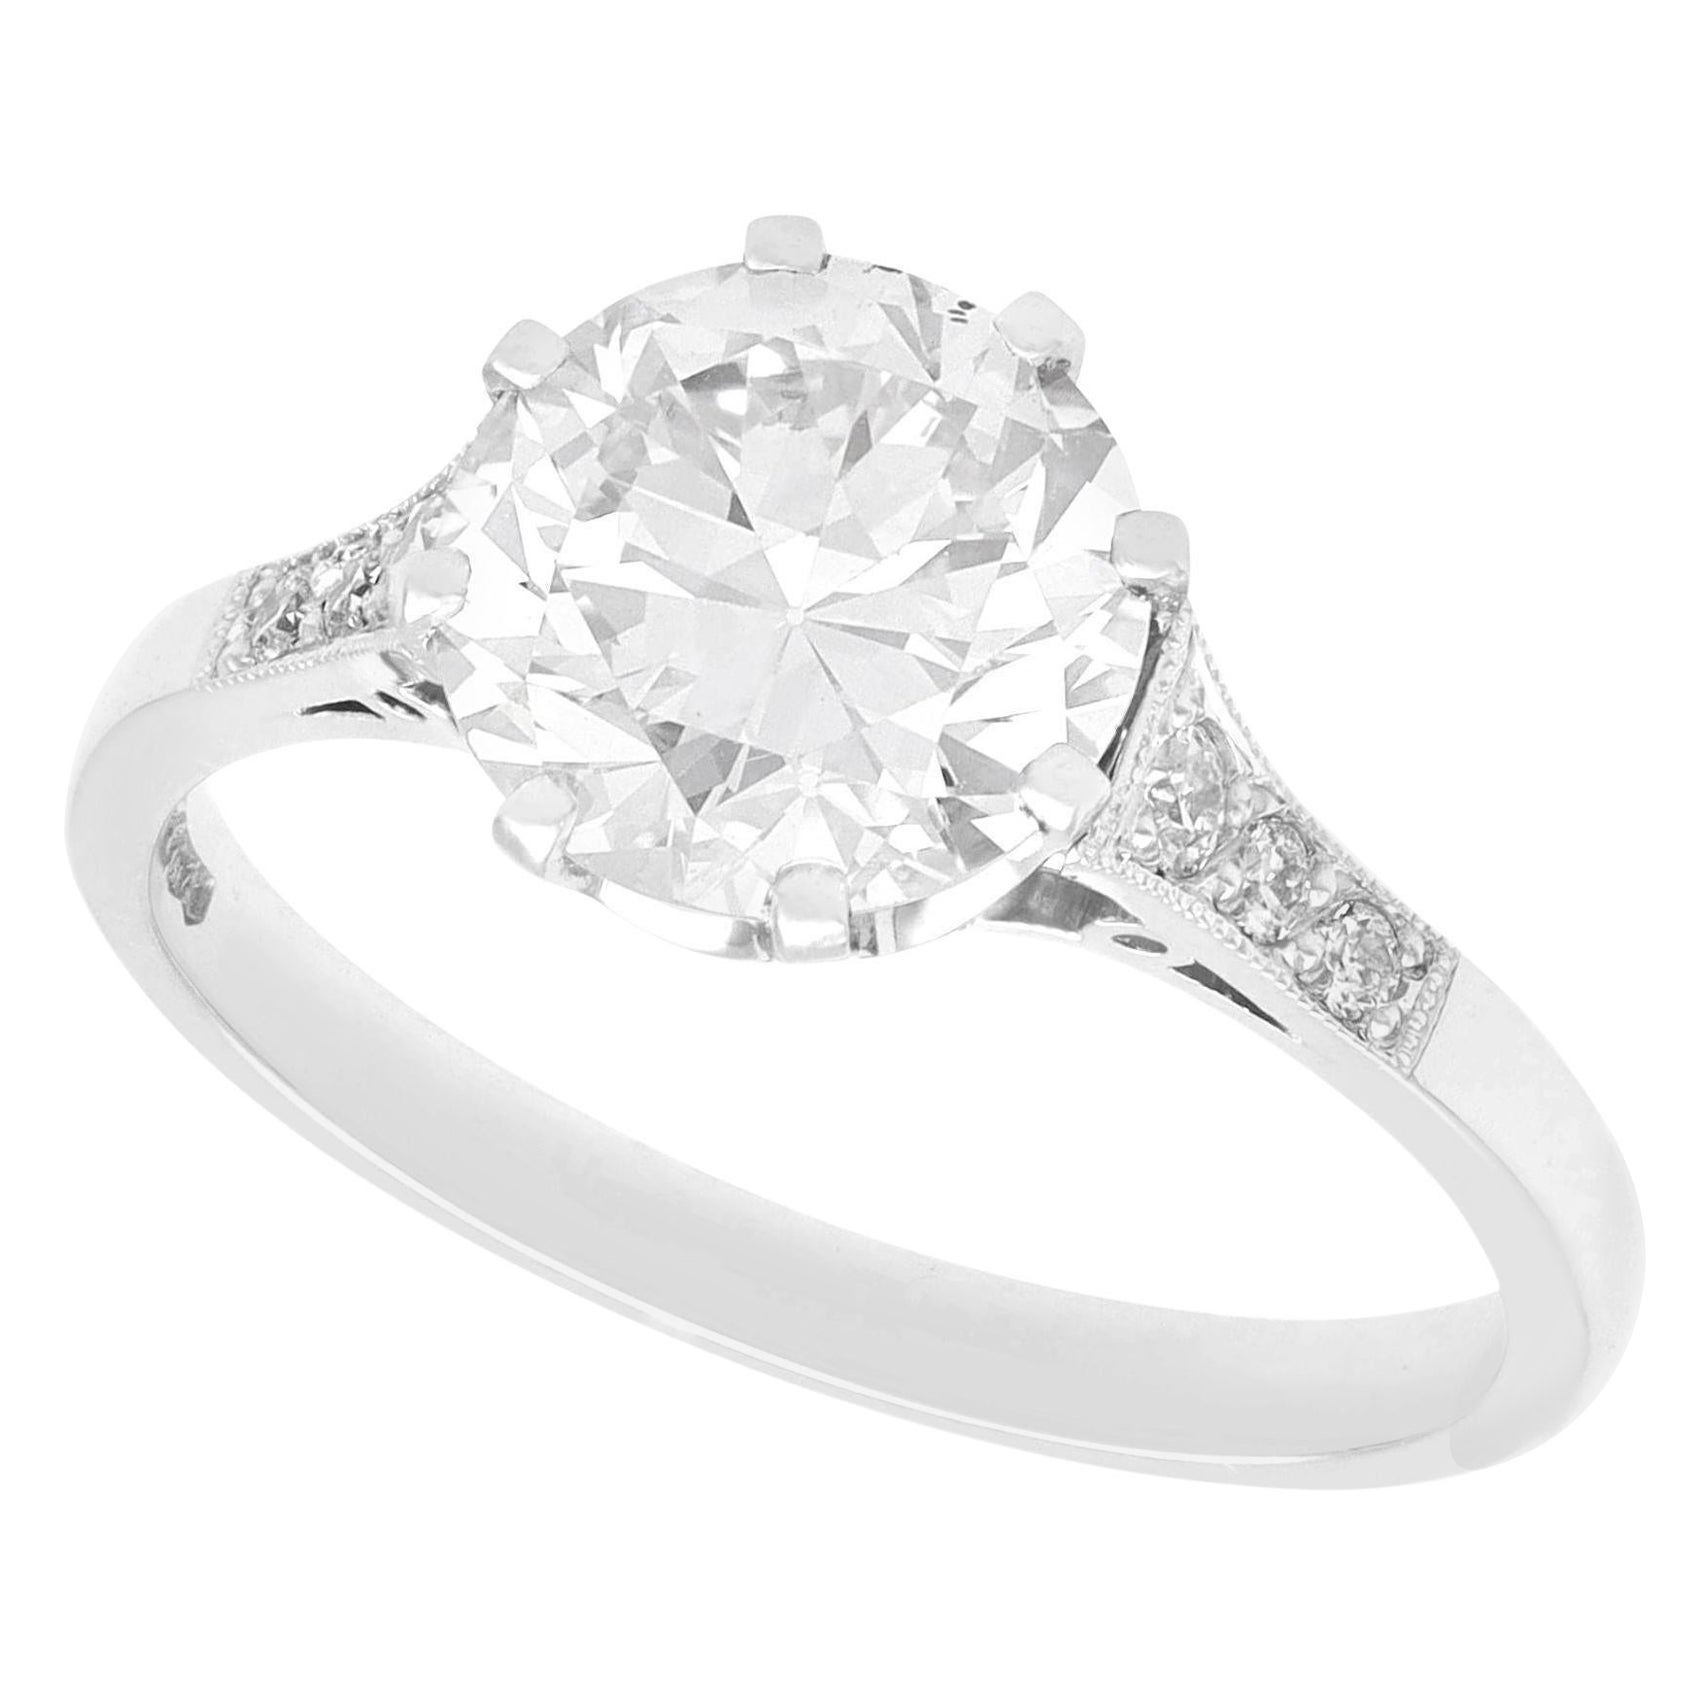 2.38 Carat Diamond and Platinum Solitaire Engagement Ring For Sale